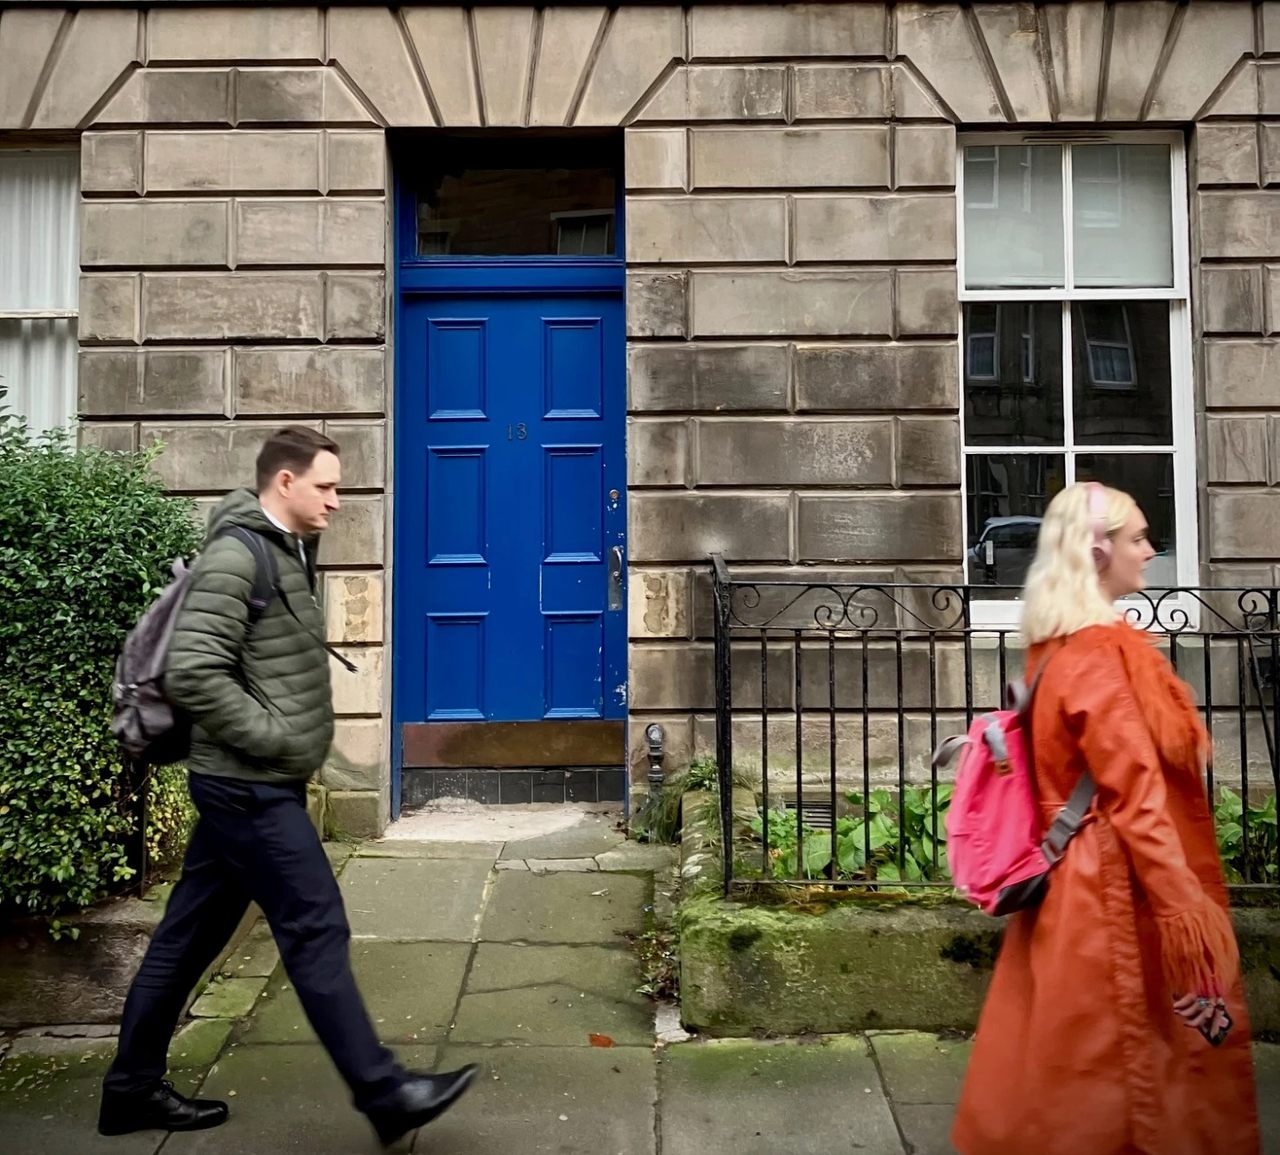 The passion project of Edinburgh resident Diarmid Mogg, Tenement Town shares the stories of the city's past inhabitants, such as Helen Pairman who lived behind this bright blue door in 1876. 